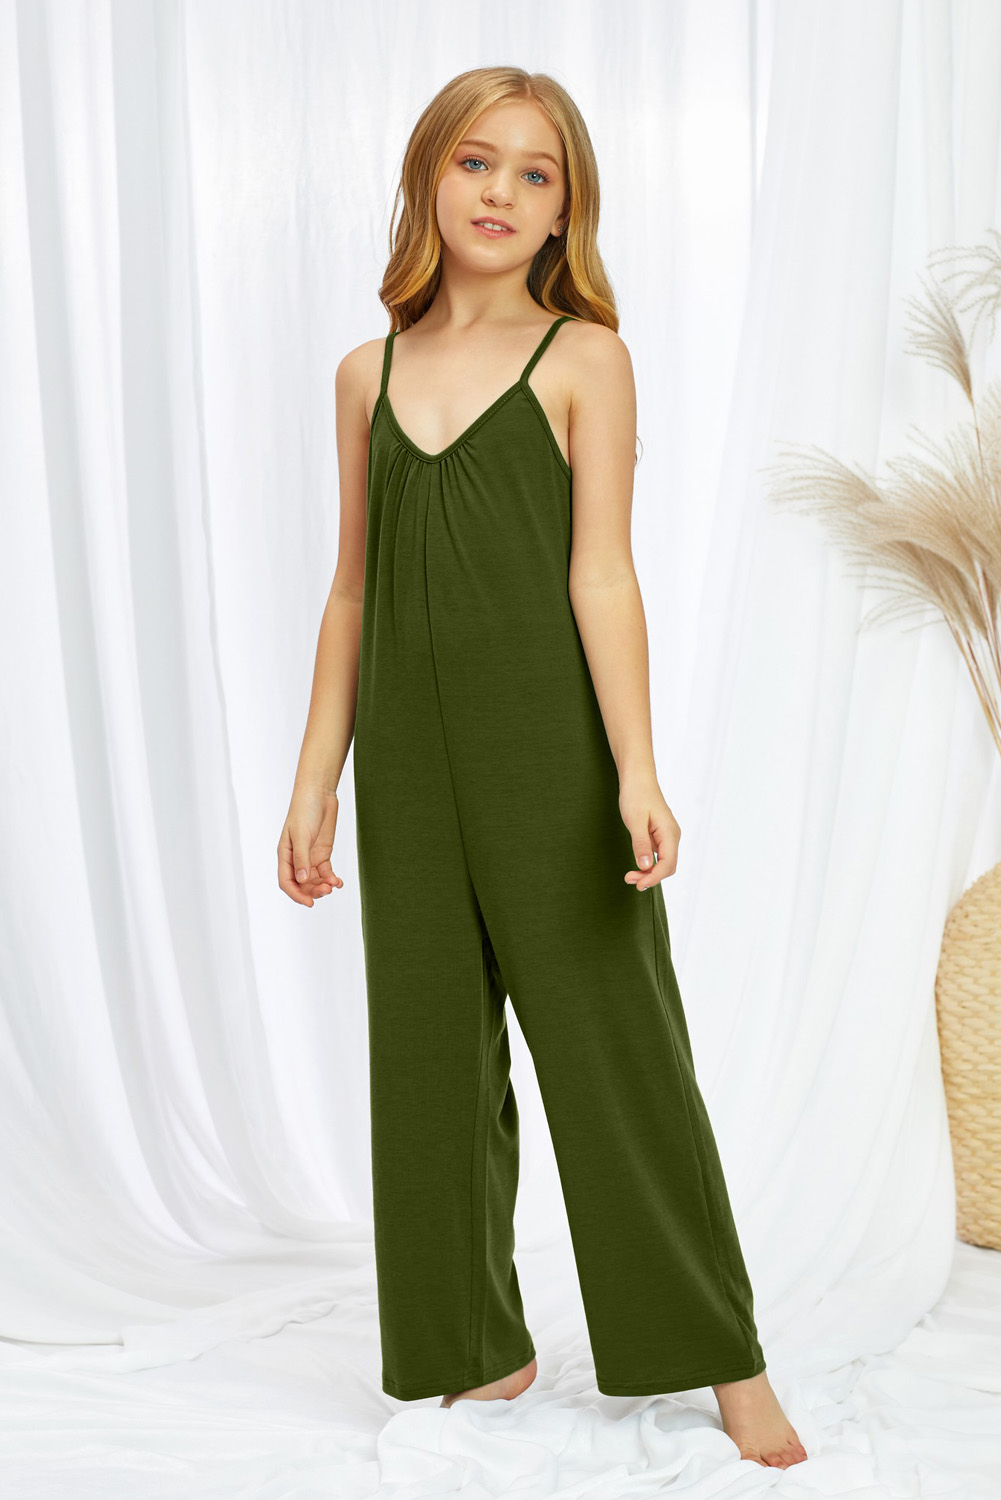 Green Spaghetti Strap Wide Leg Girl's Jumpsuit With Pocket